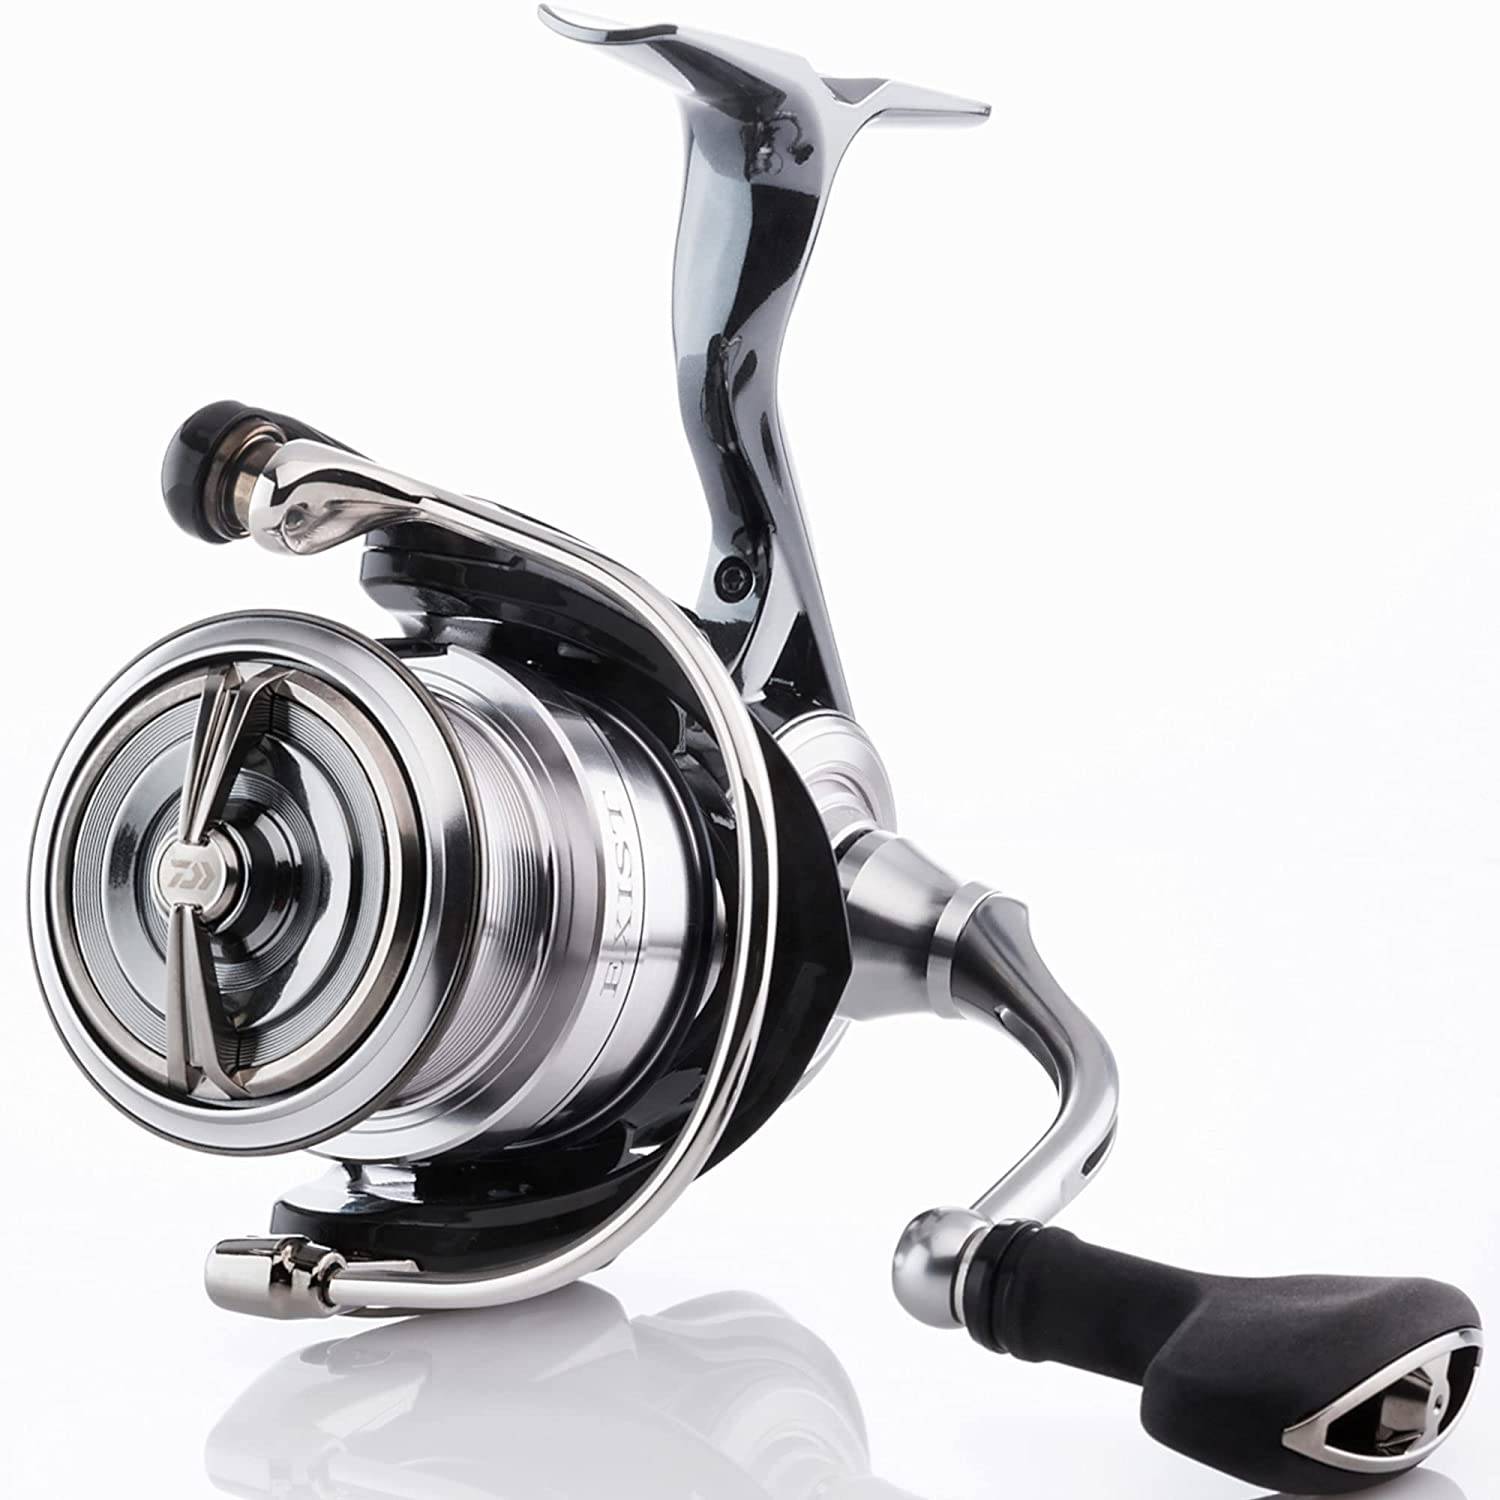 Daiwa Exist LT Right Hand 3000-CXH Spinning Reel - Discovery Japan